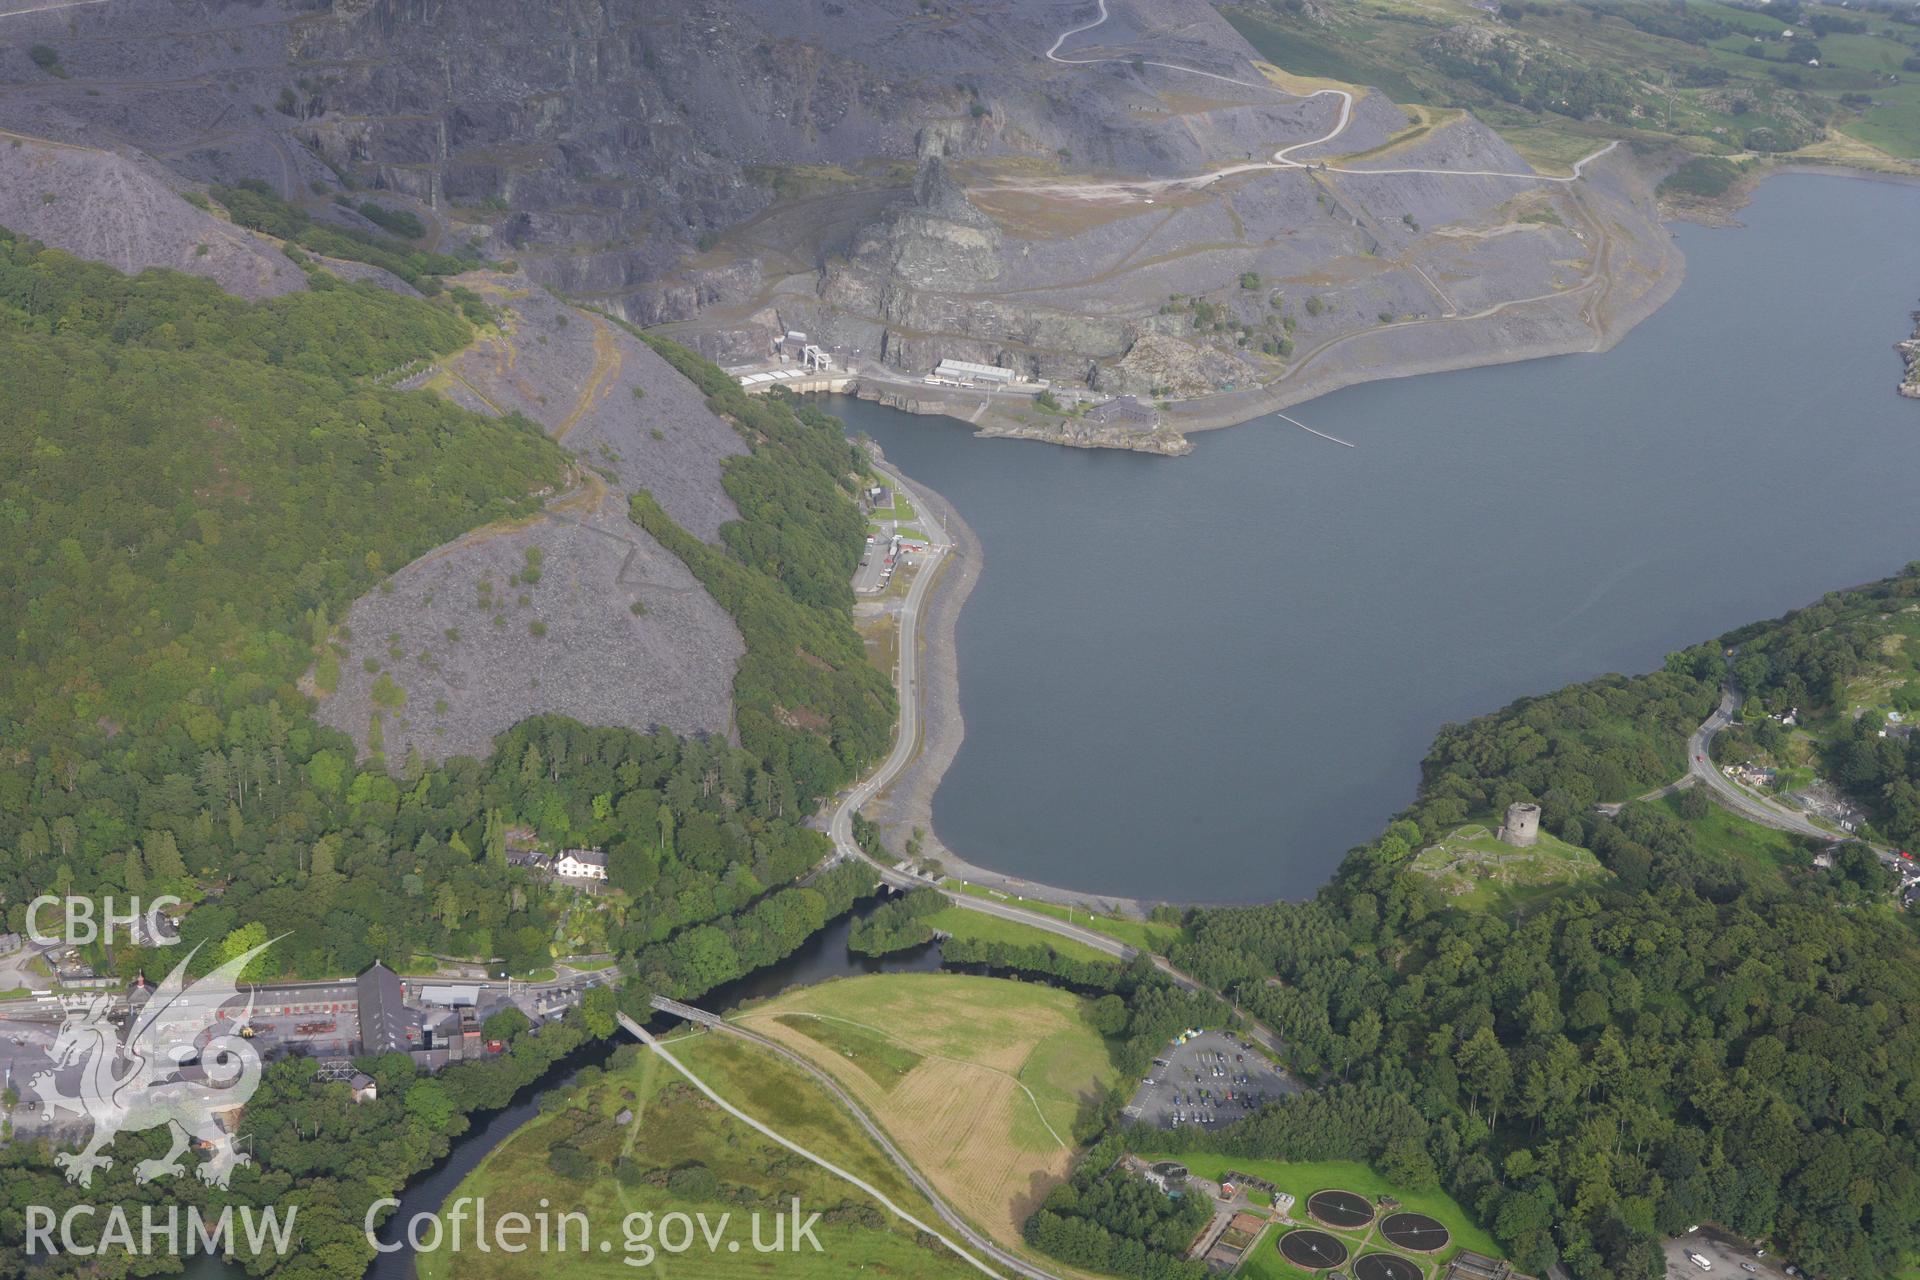 RCAHMW colour oblique aerial photograph of Dolbadarn Castle, Llanberis. Taken on 06 August 2009 by Toby Driver